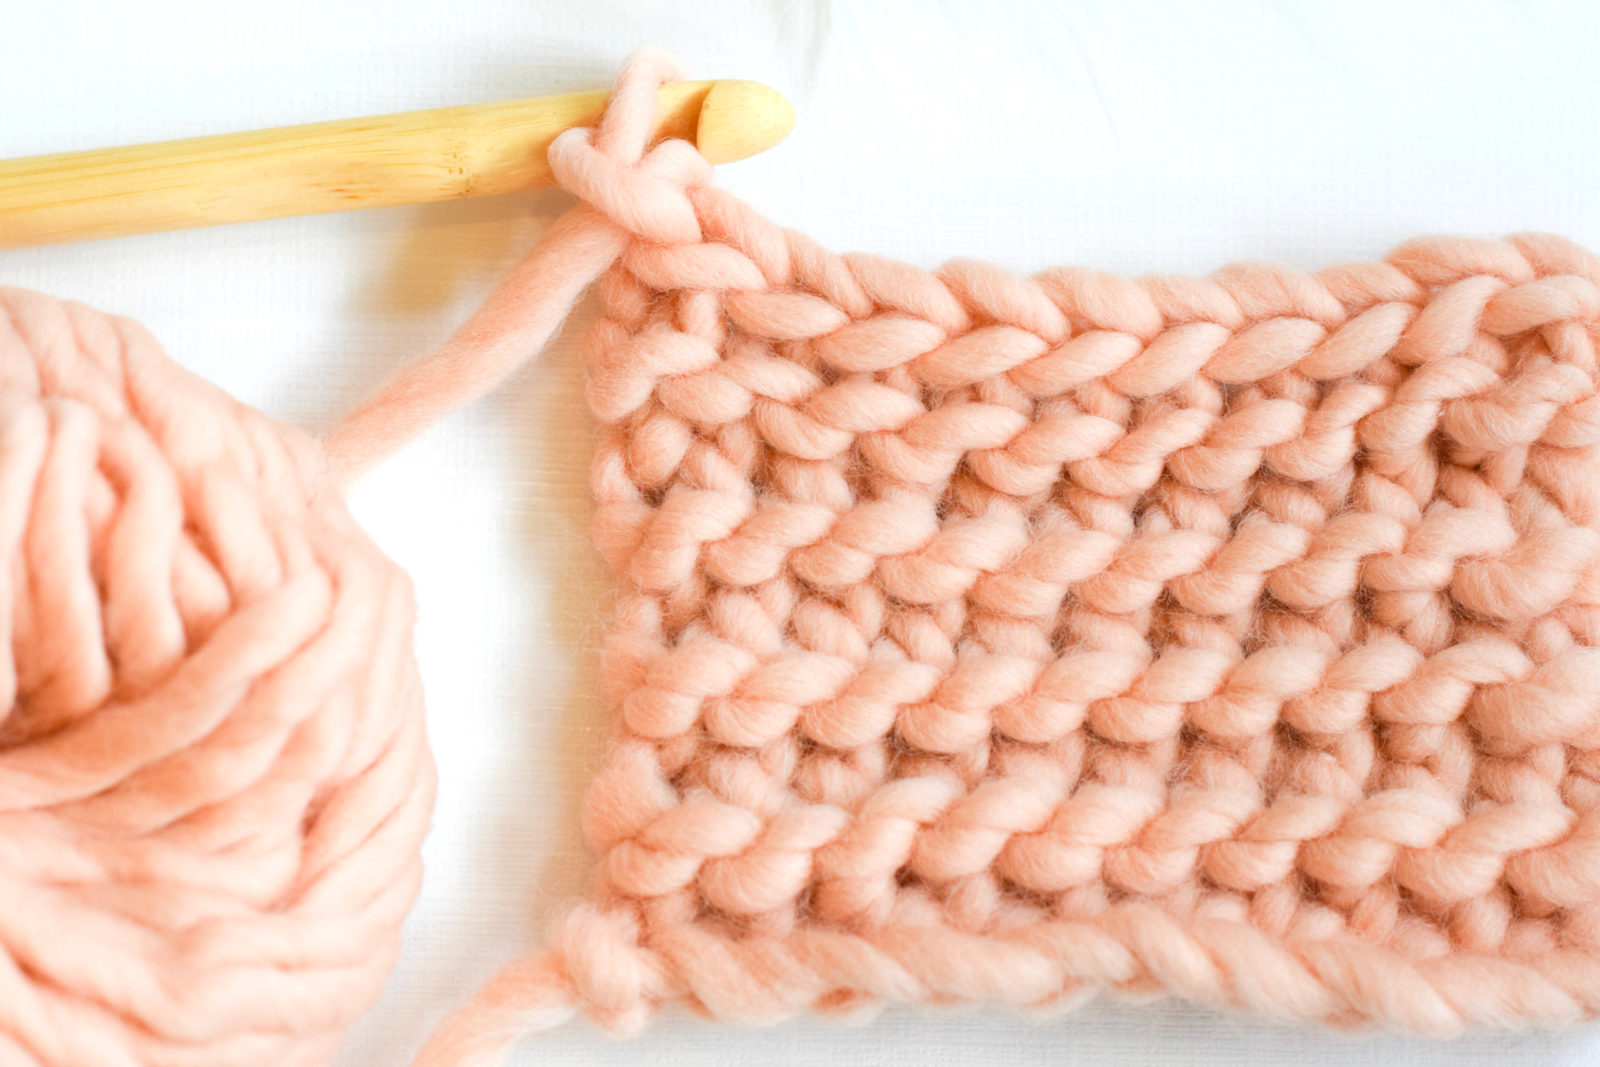 How To Crochet the Purl Slip Stitch